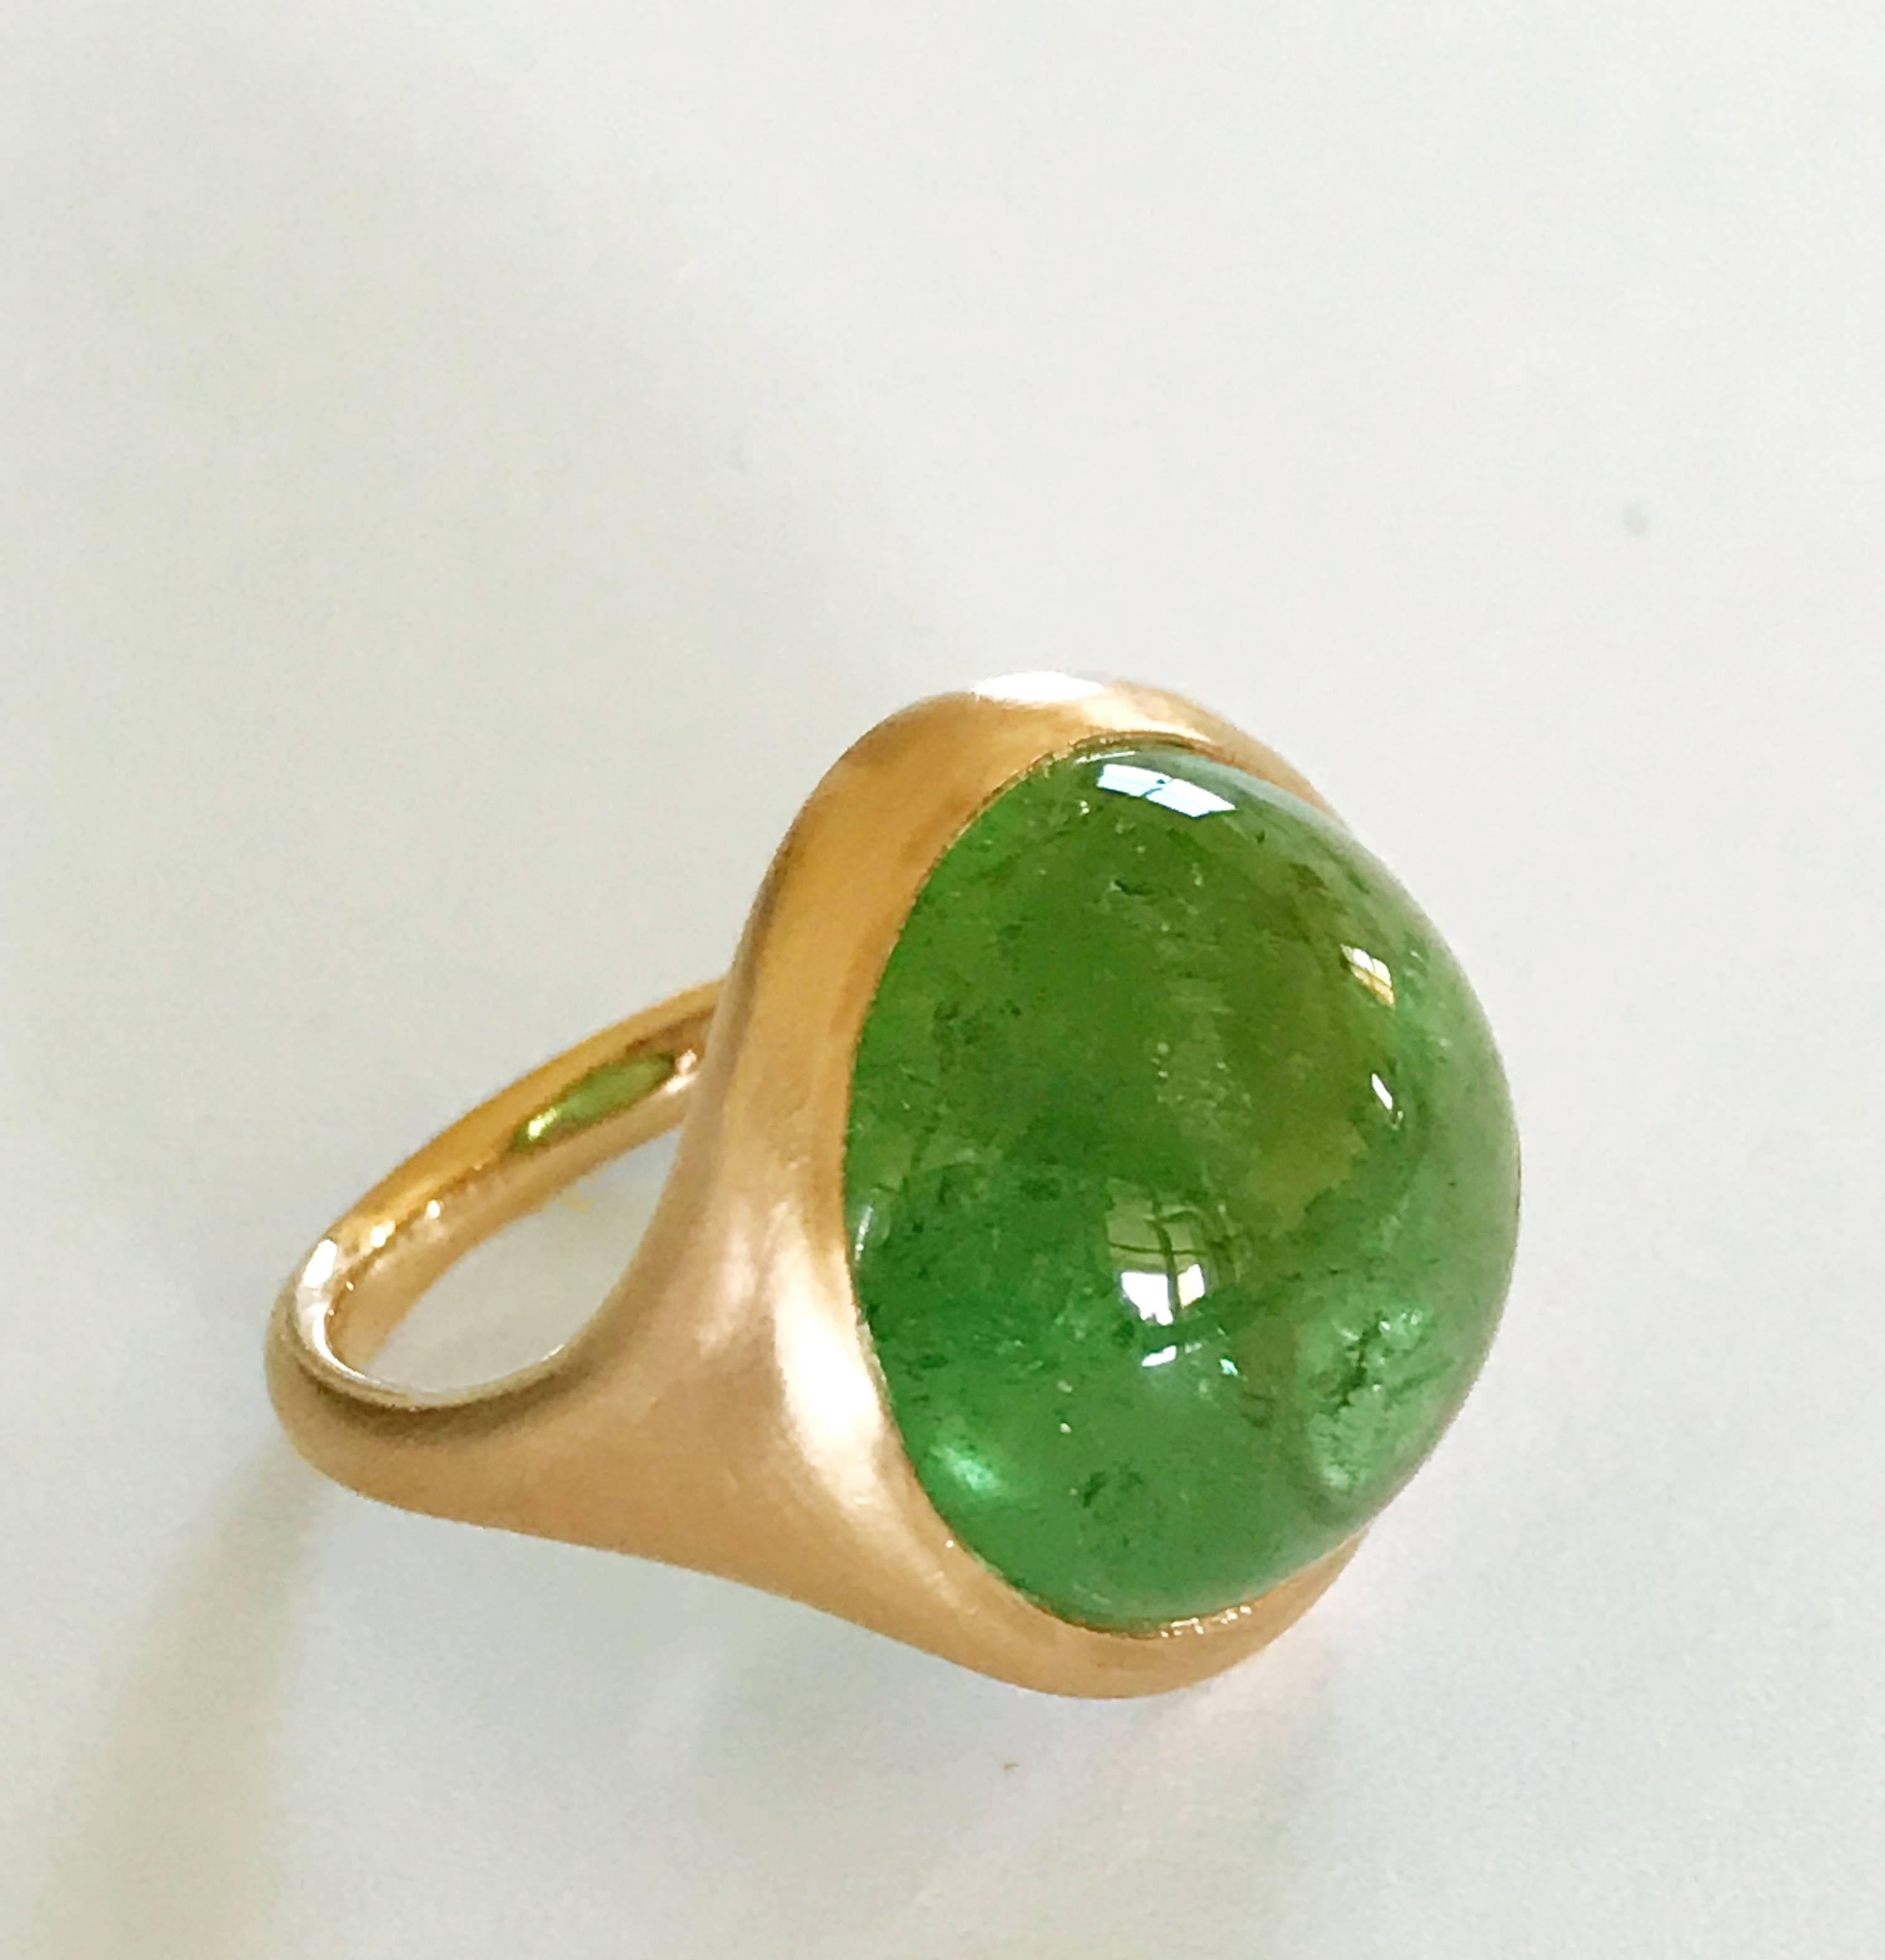 One of a Kind 18k rose gold matte finishing ring with a 18,1 carat bezel-set round cabochon cut Green Tourmaline.  
Ring size 7 1/4 - EU 55 re-sizable to most finger sizes.  
Bezel stone dimensions : width 19,5 mm height 19,5 mm.
The ring is